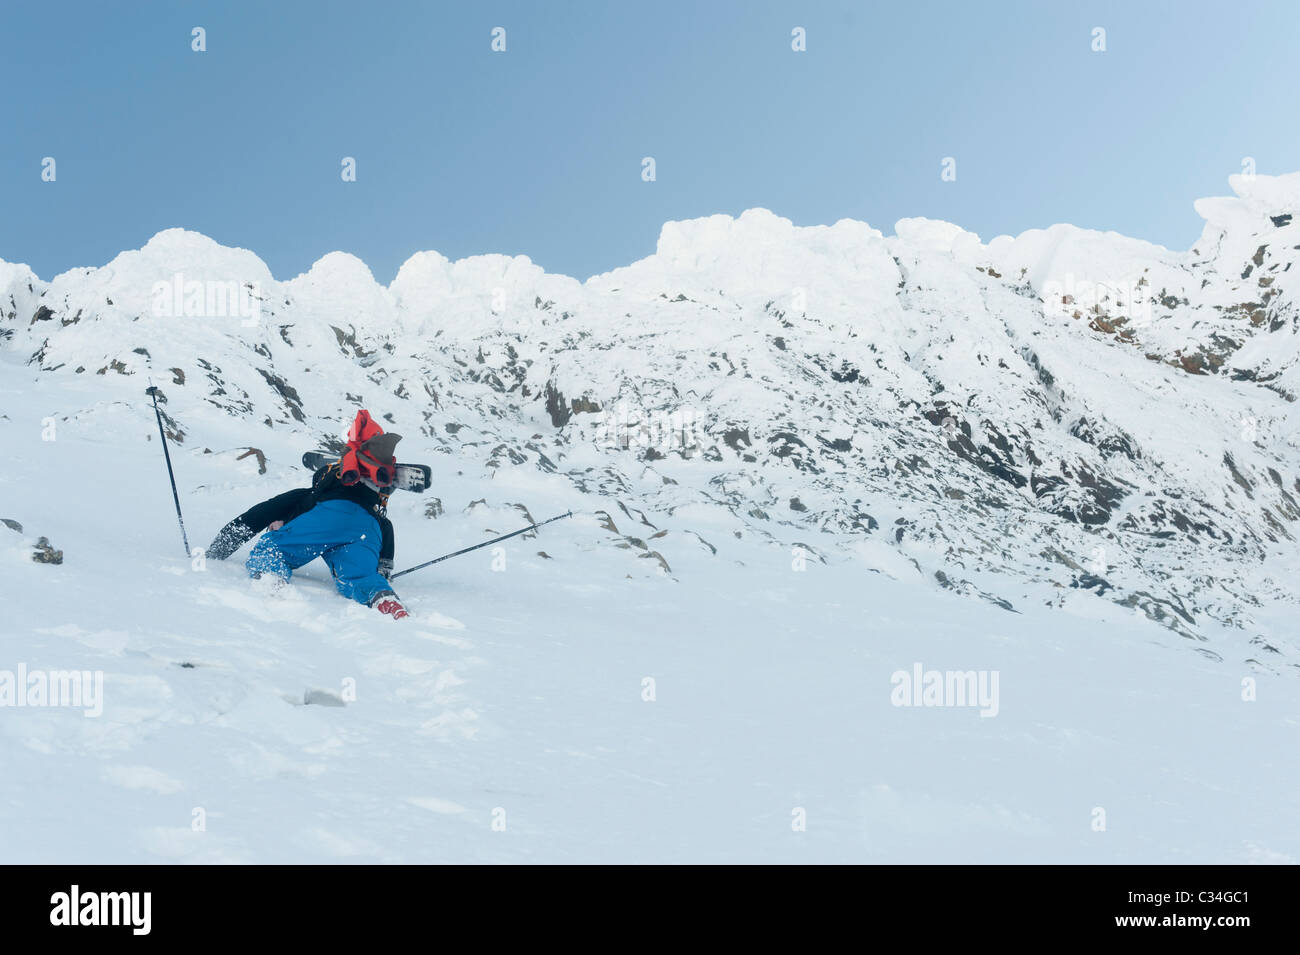 A free skier climbing up a snowy mountain side at Lofoten Islands, Norway Stock Photo